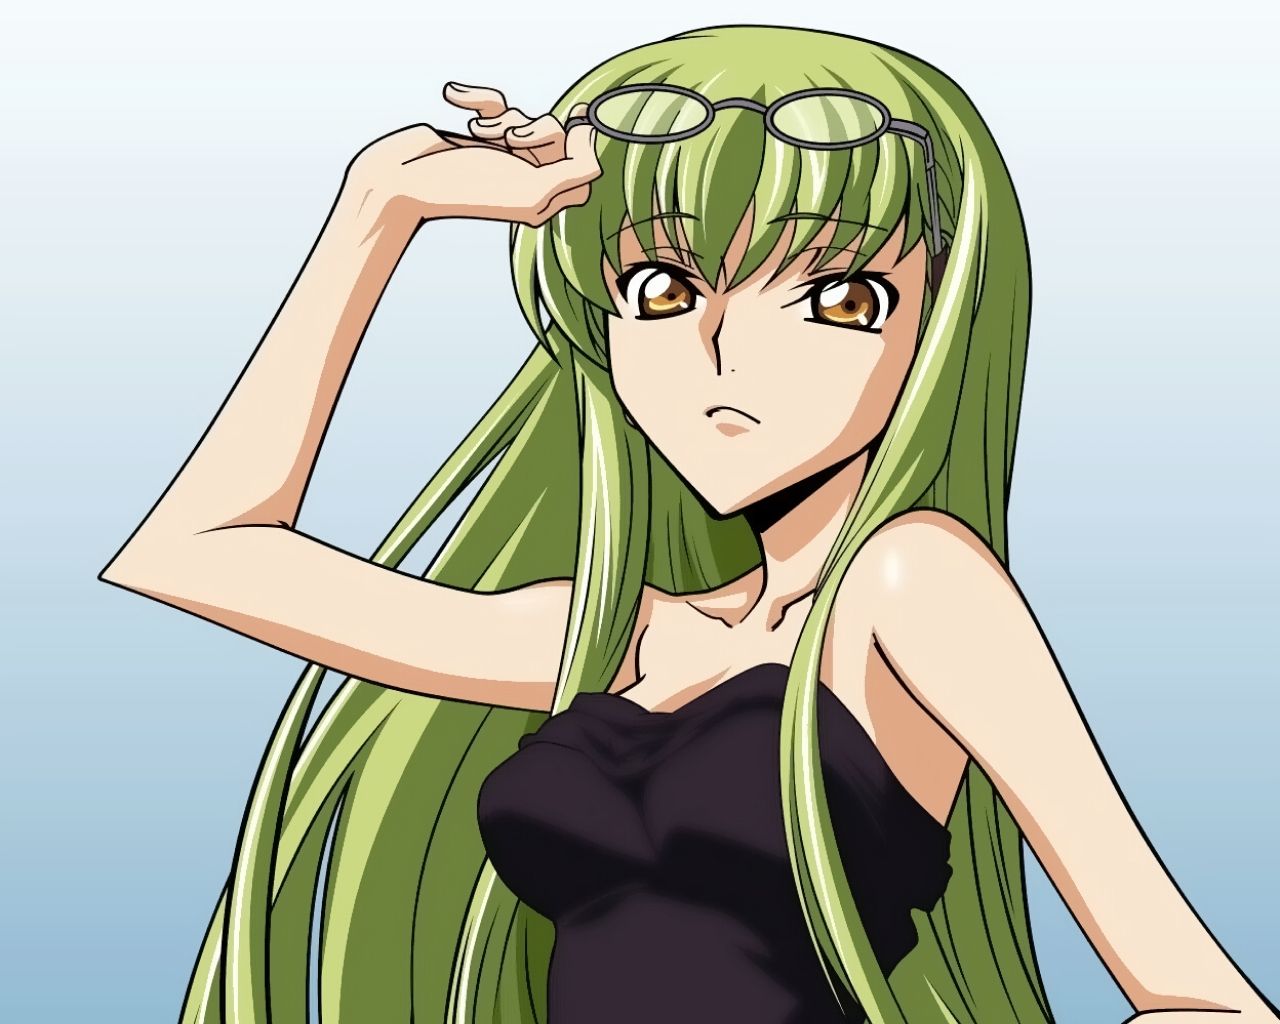 [Image] is sex still excited for "Code Geass" c. c. abnormal wwwwwwwww. 14